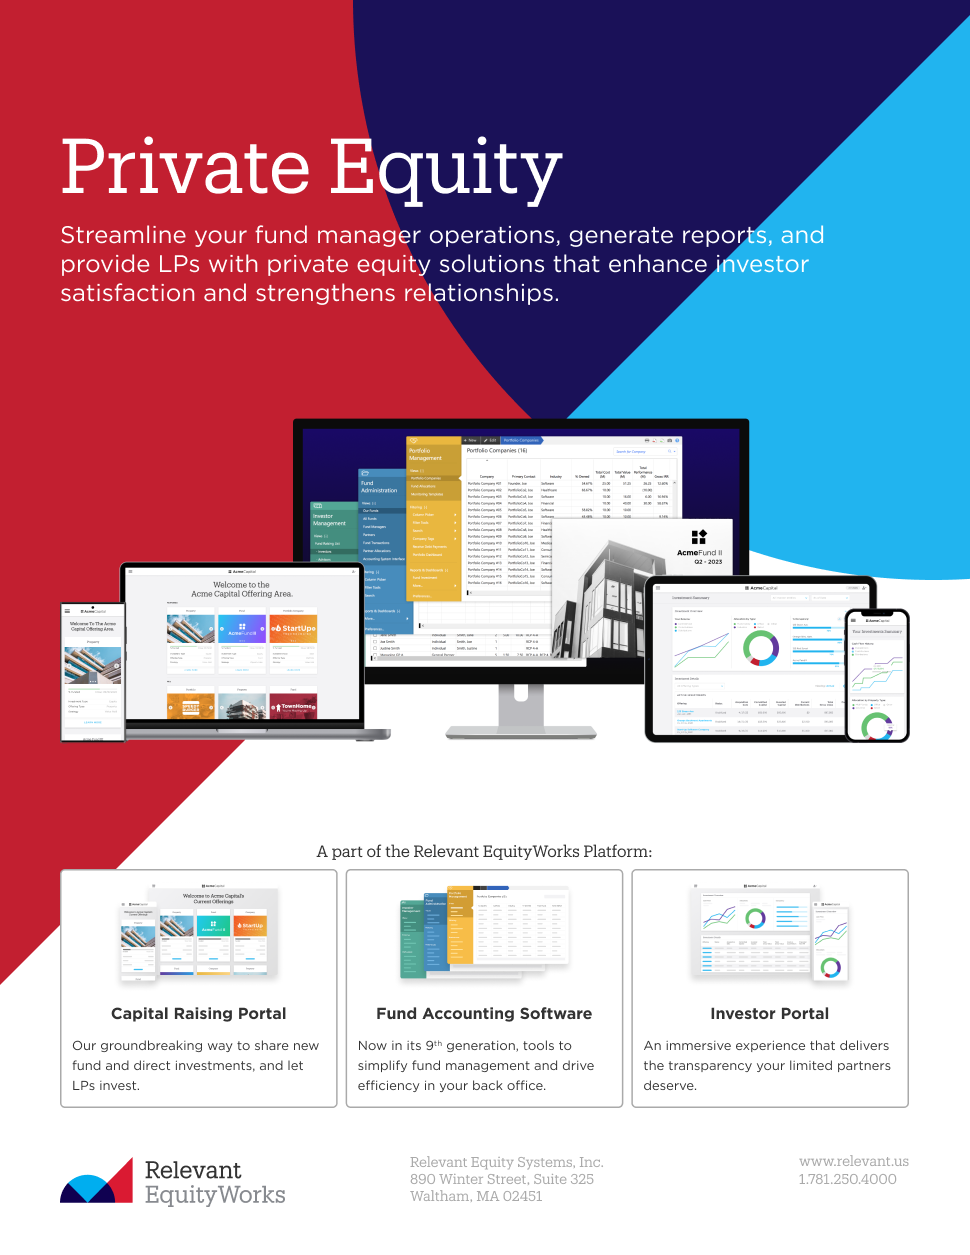 Relevant EquityWorks - Private Equity Solution handout